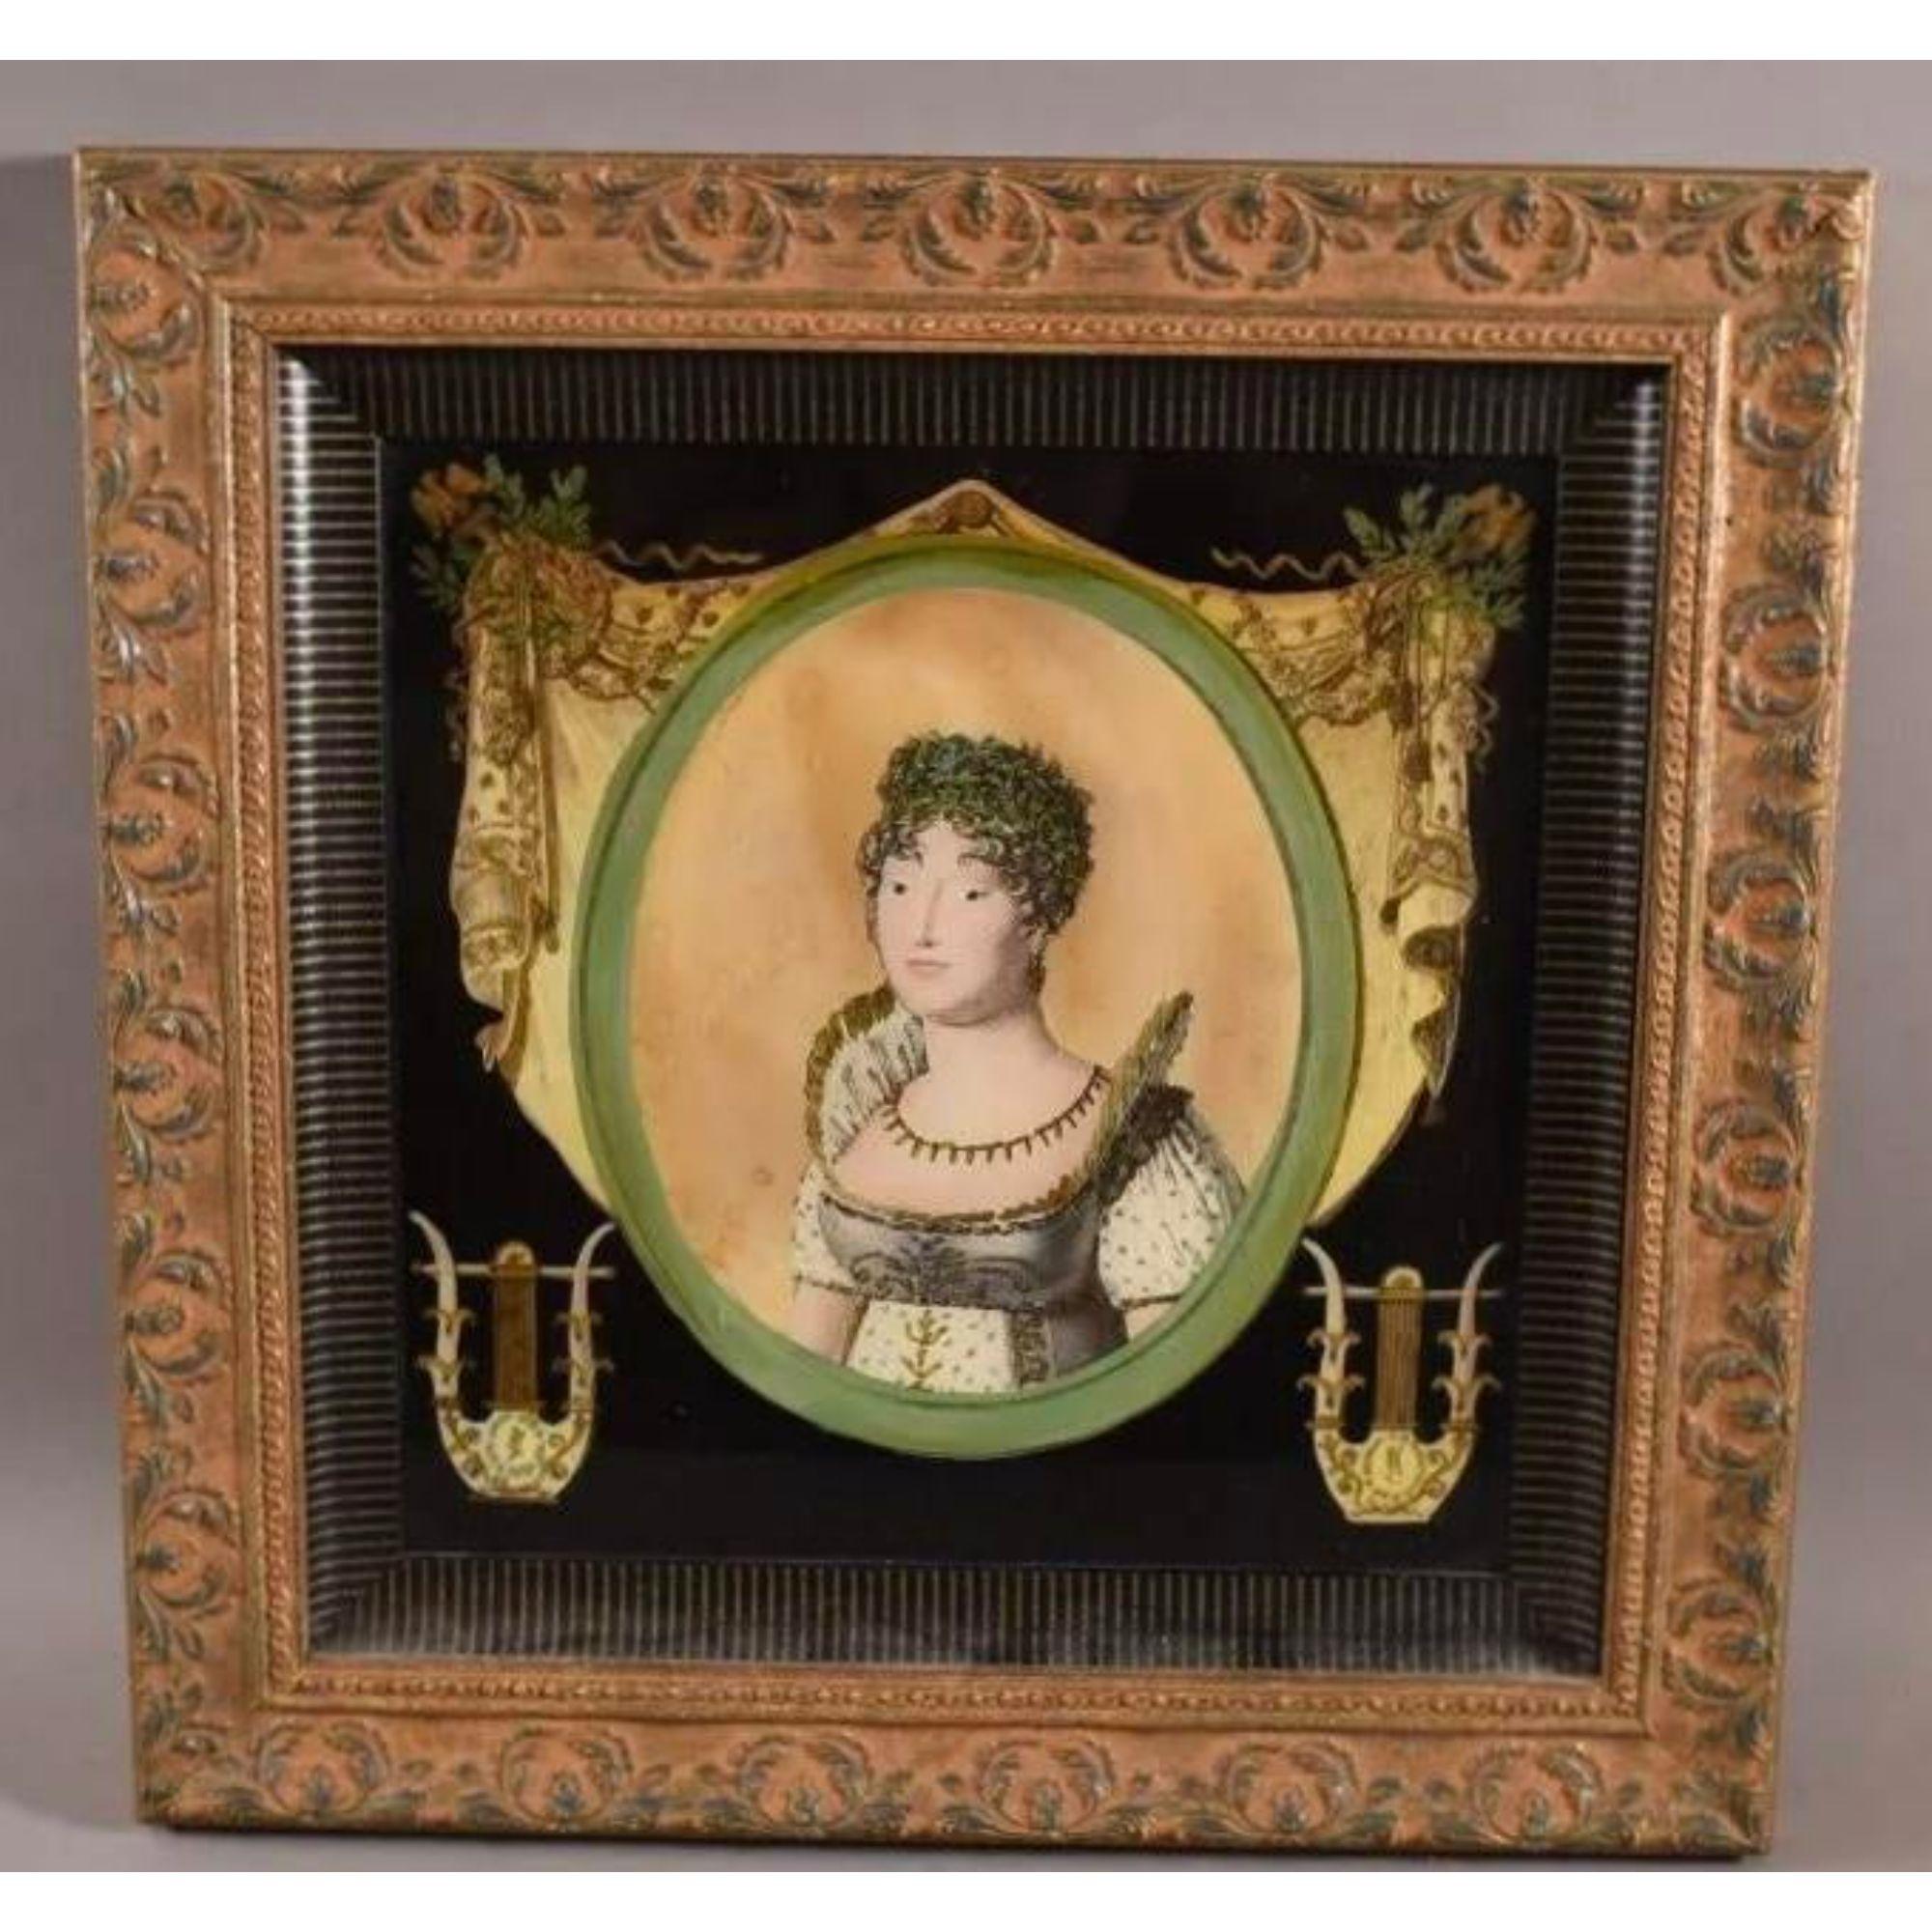 Antique French eglomise reverse portrait painting on glass

Additional information: 
Materials: Glass
Color: Black
Period: 19th century
Styles: French
Art subjects: Portrait
Frame type: Framed
Item Type: Vintage, antique or